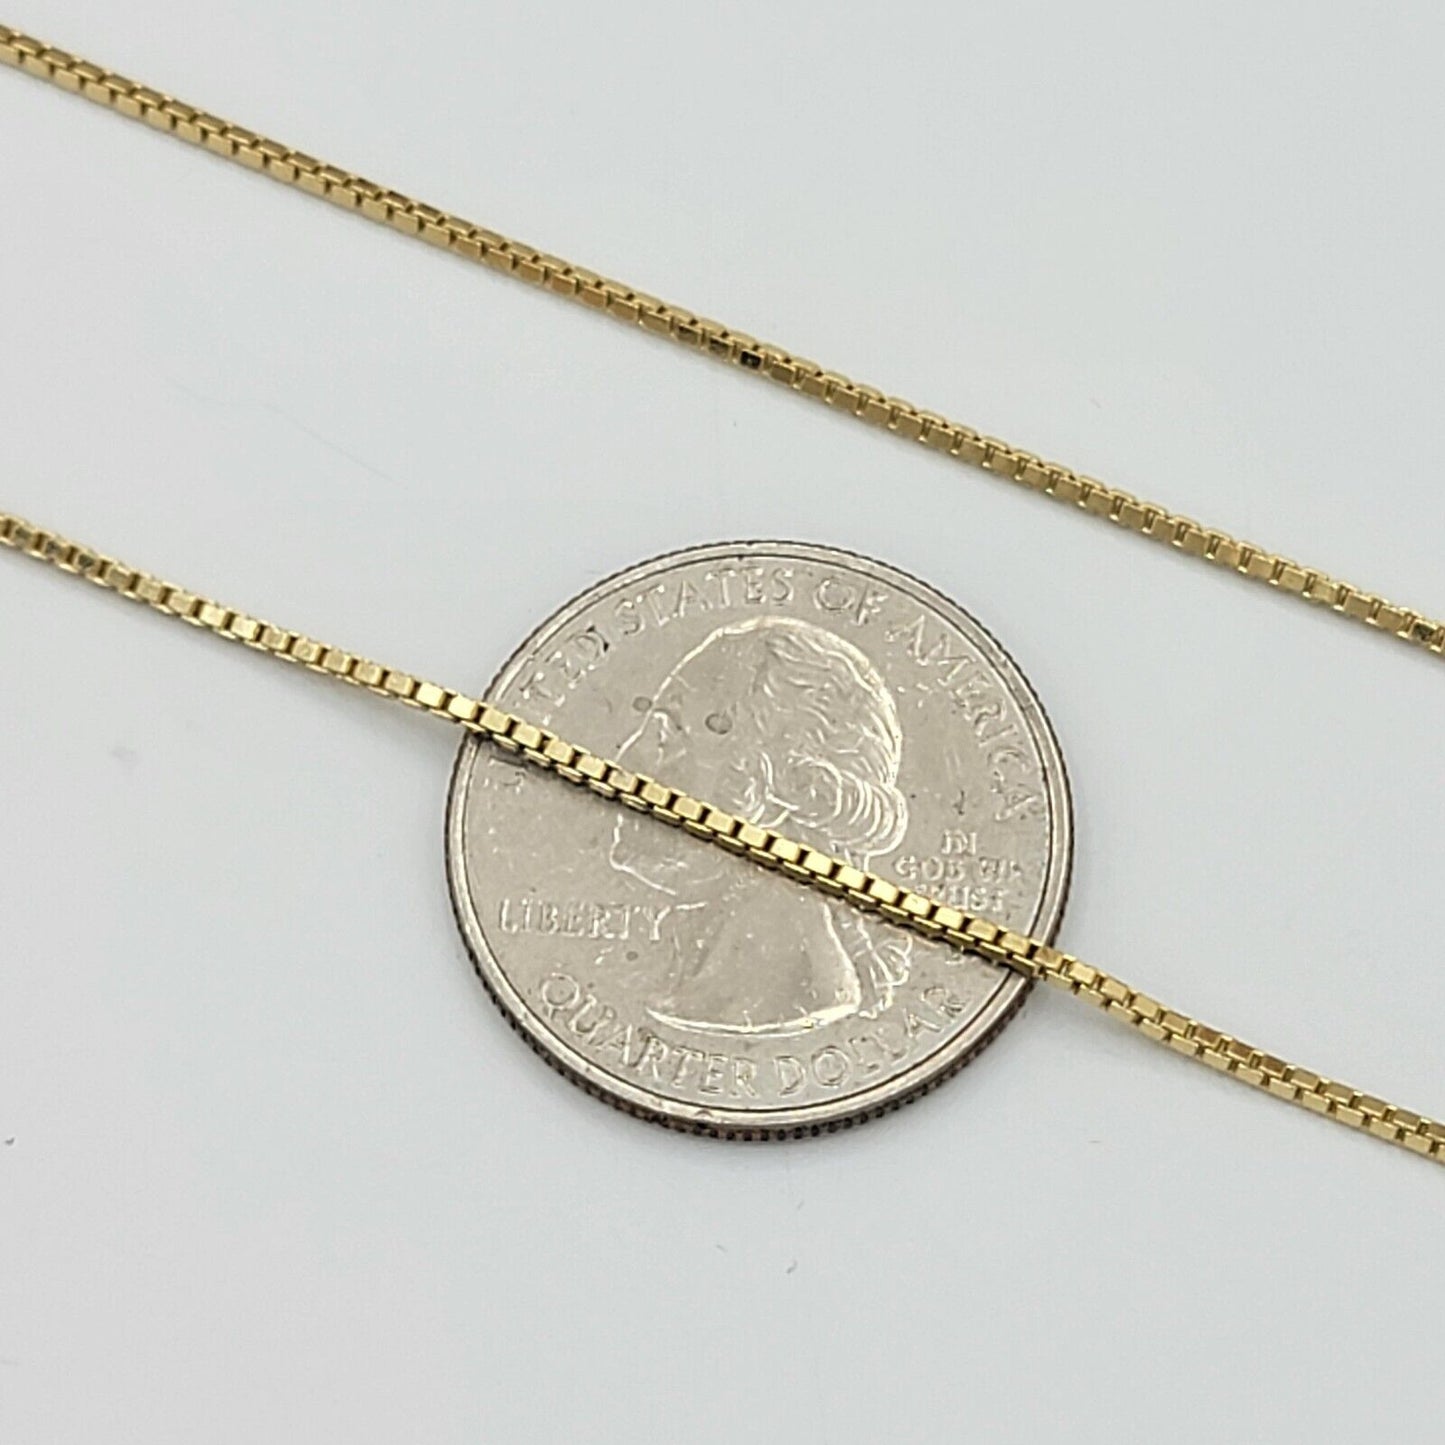 Necklaces - 14K Gold Plated. Chain Necklace - Box Style - 20in Long - 1.2mm